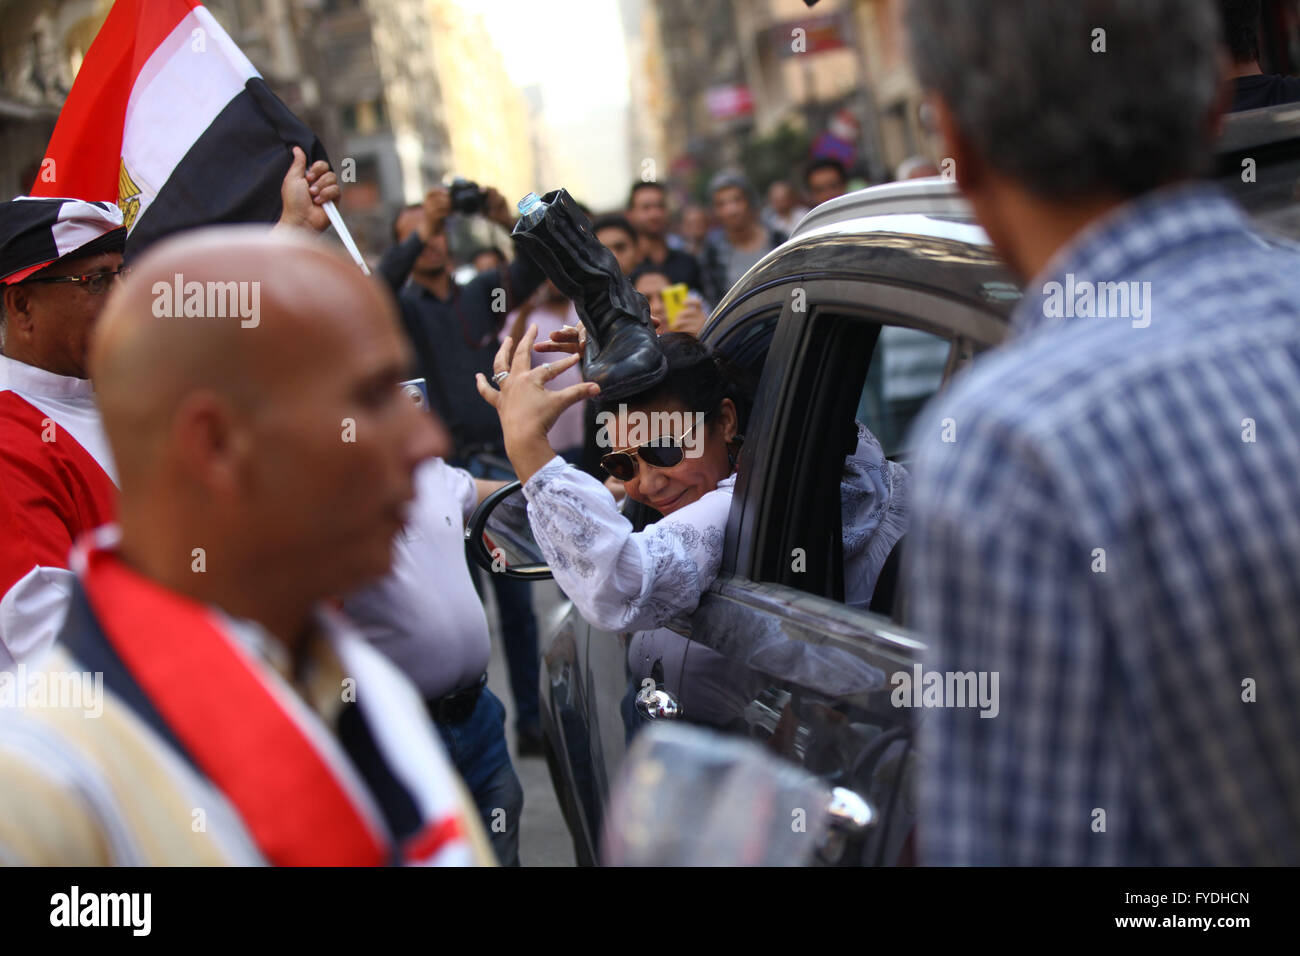 Cairo. 25th Apr, 2016. Supporters of Egypt's army and Egyptian President Abdel Fattah al-Sisi gather near the Tahrir Square as a way to celebrate the 34th Sinai Liberation Day in Cairo, Egypt on April 25, 2016. © Ahmed Gomaa/Xinhua/Alamy Live News Stock Photo